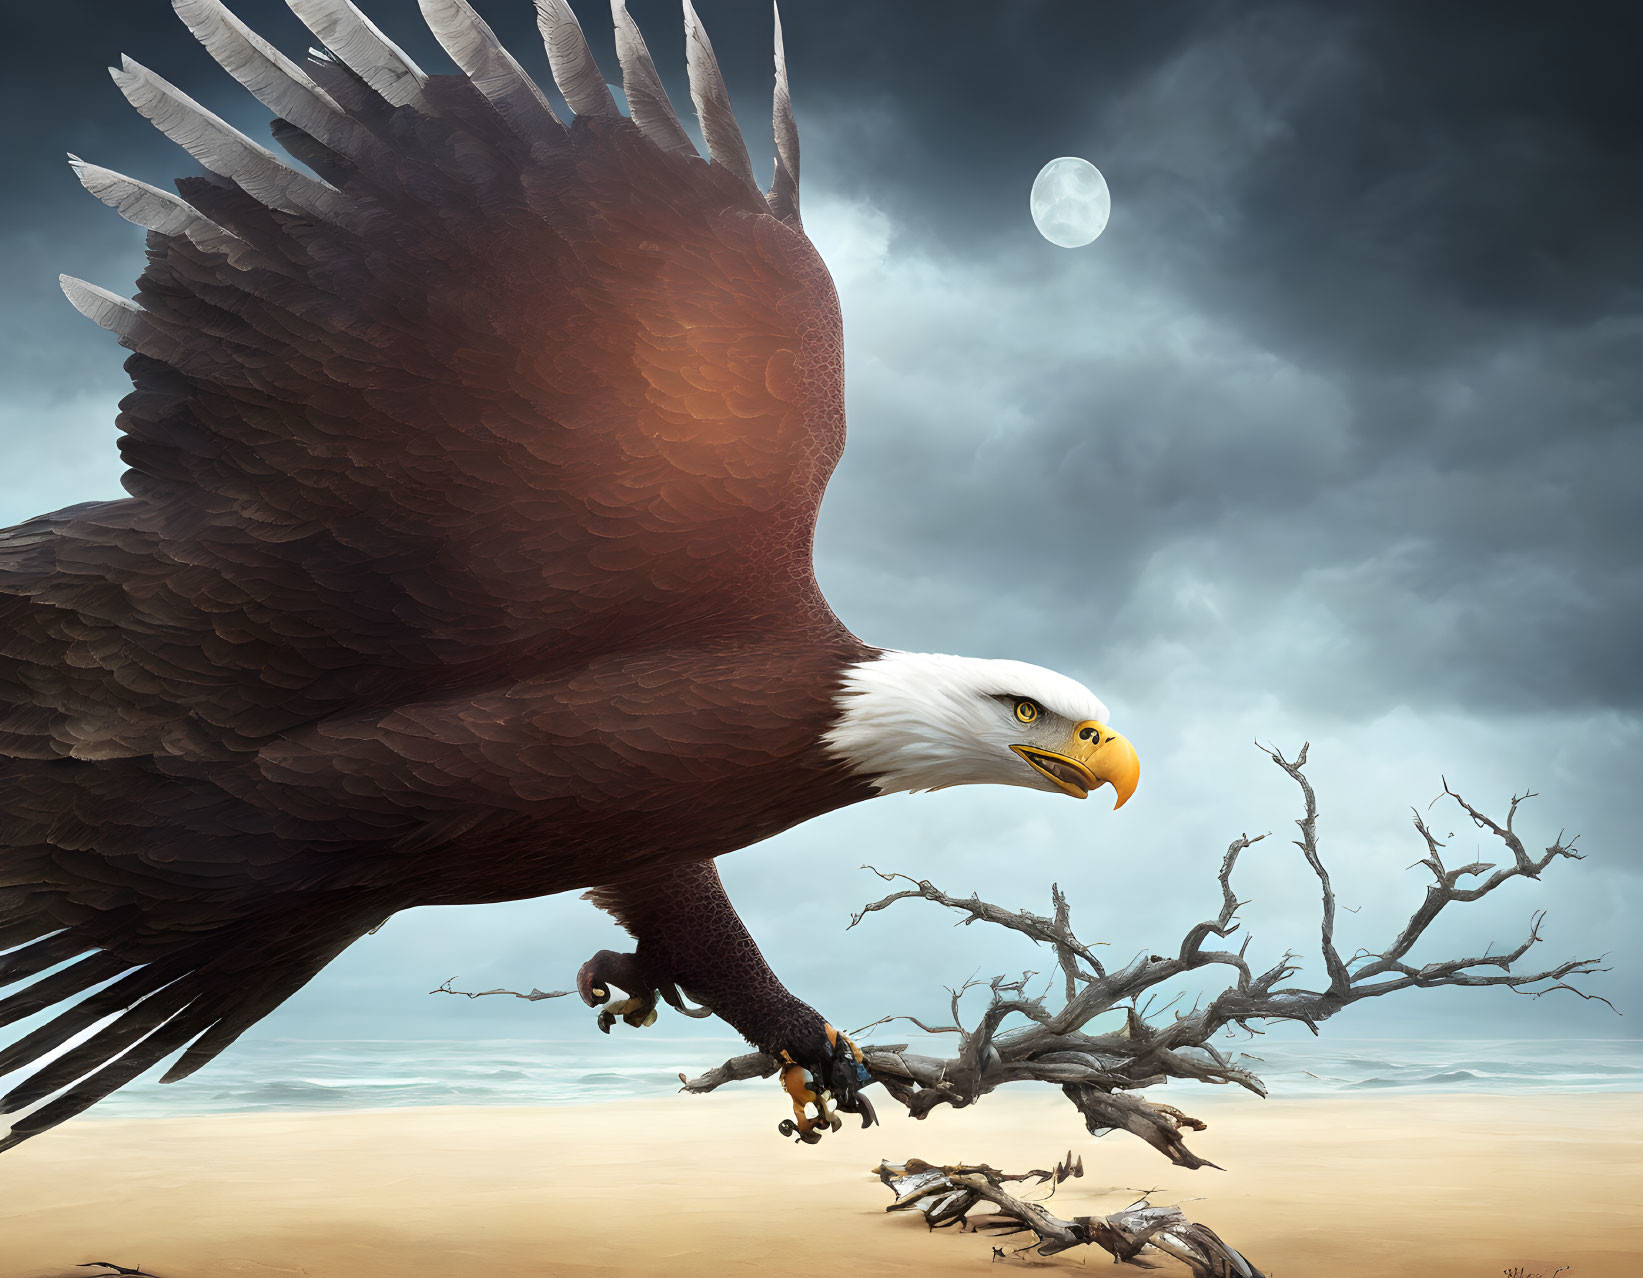 Bald eagle flying over stormy landscape with moon